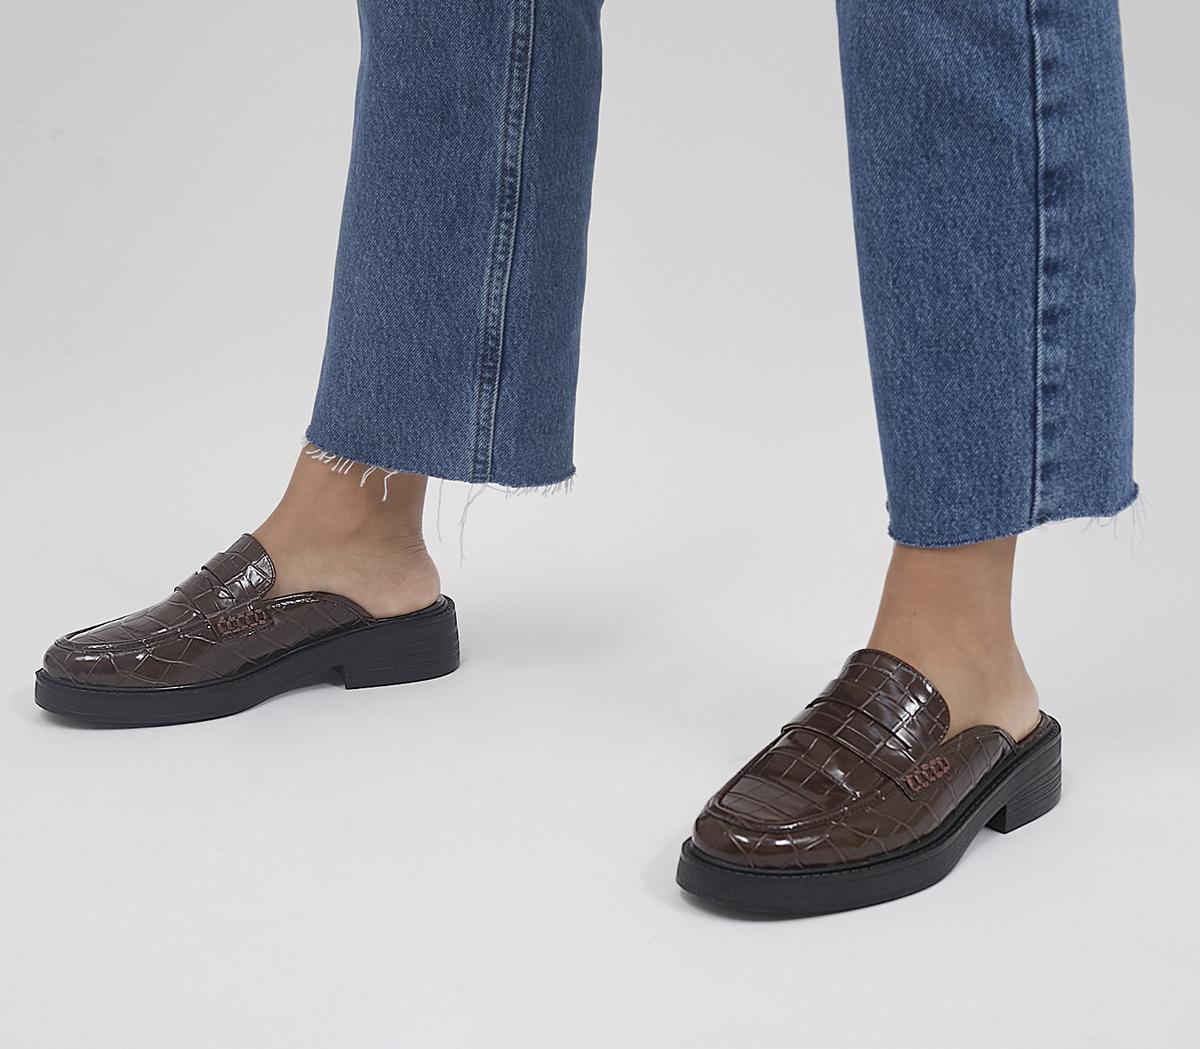 Formed Loafer Mules   Synthetic